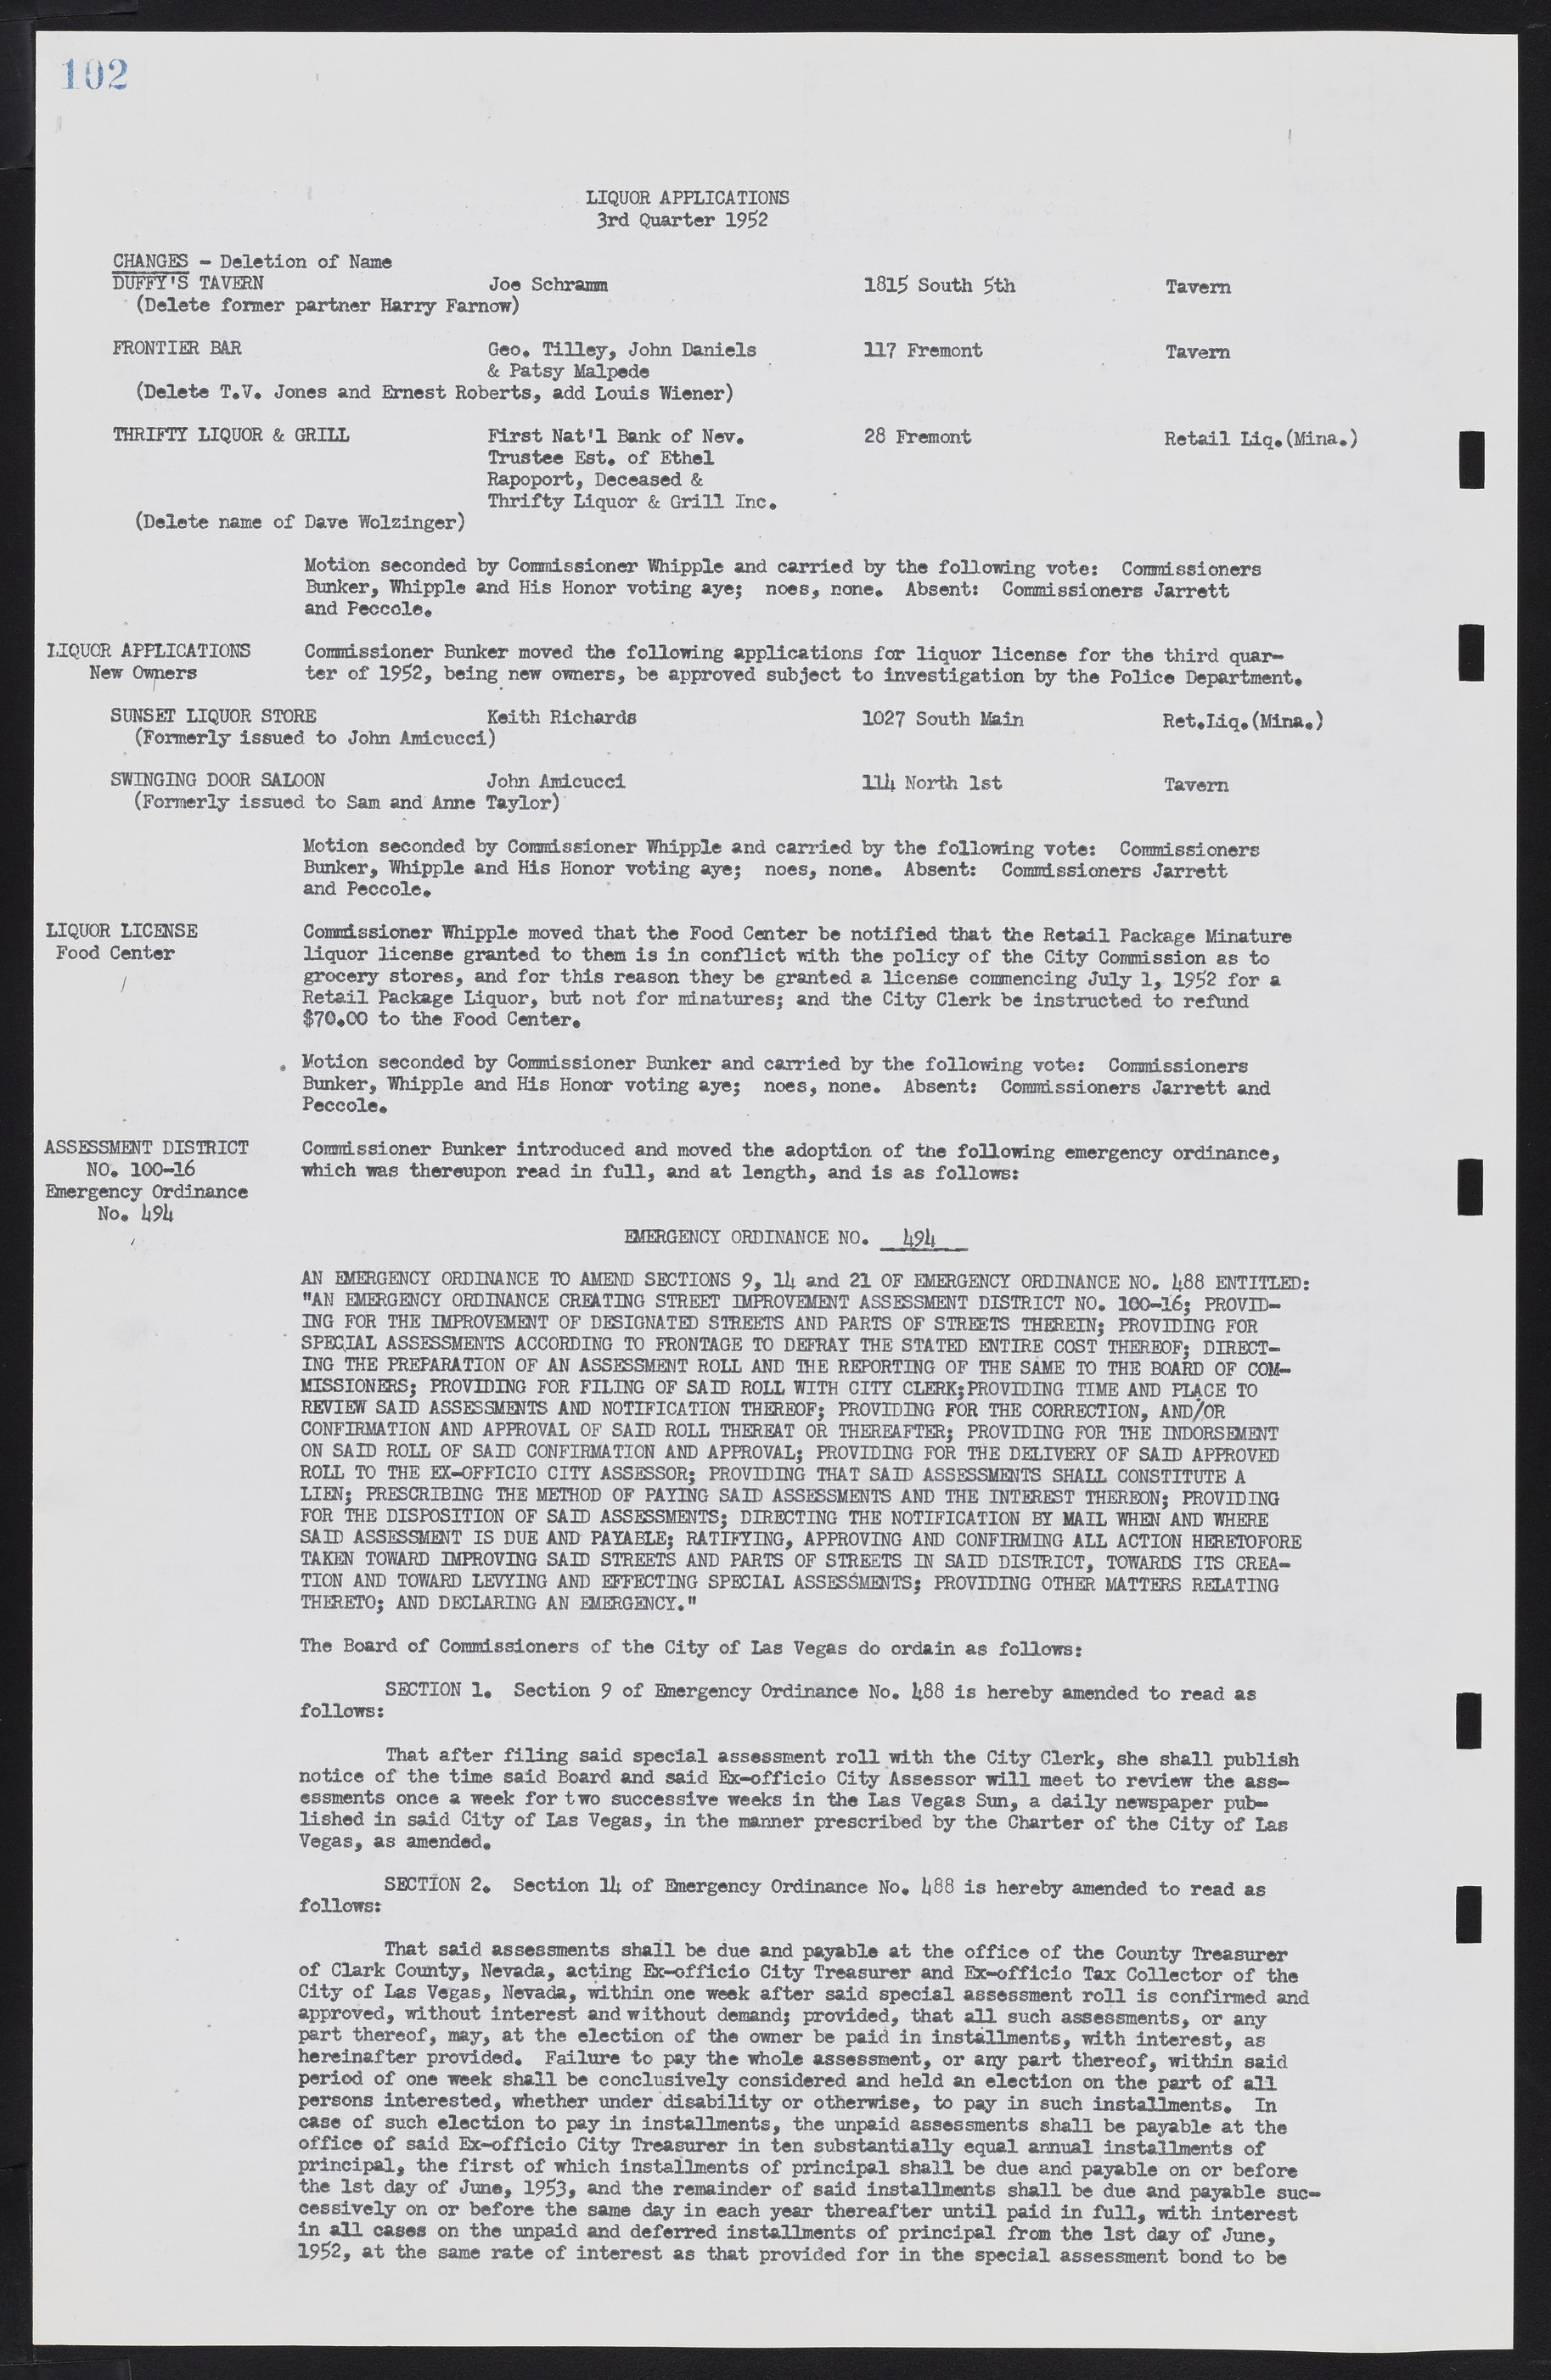 Las Vegas City Commission Minutes, May 26, 1952 to February 17, 1954, lvc000008-106